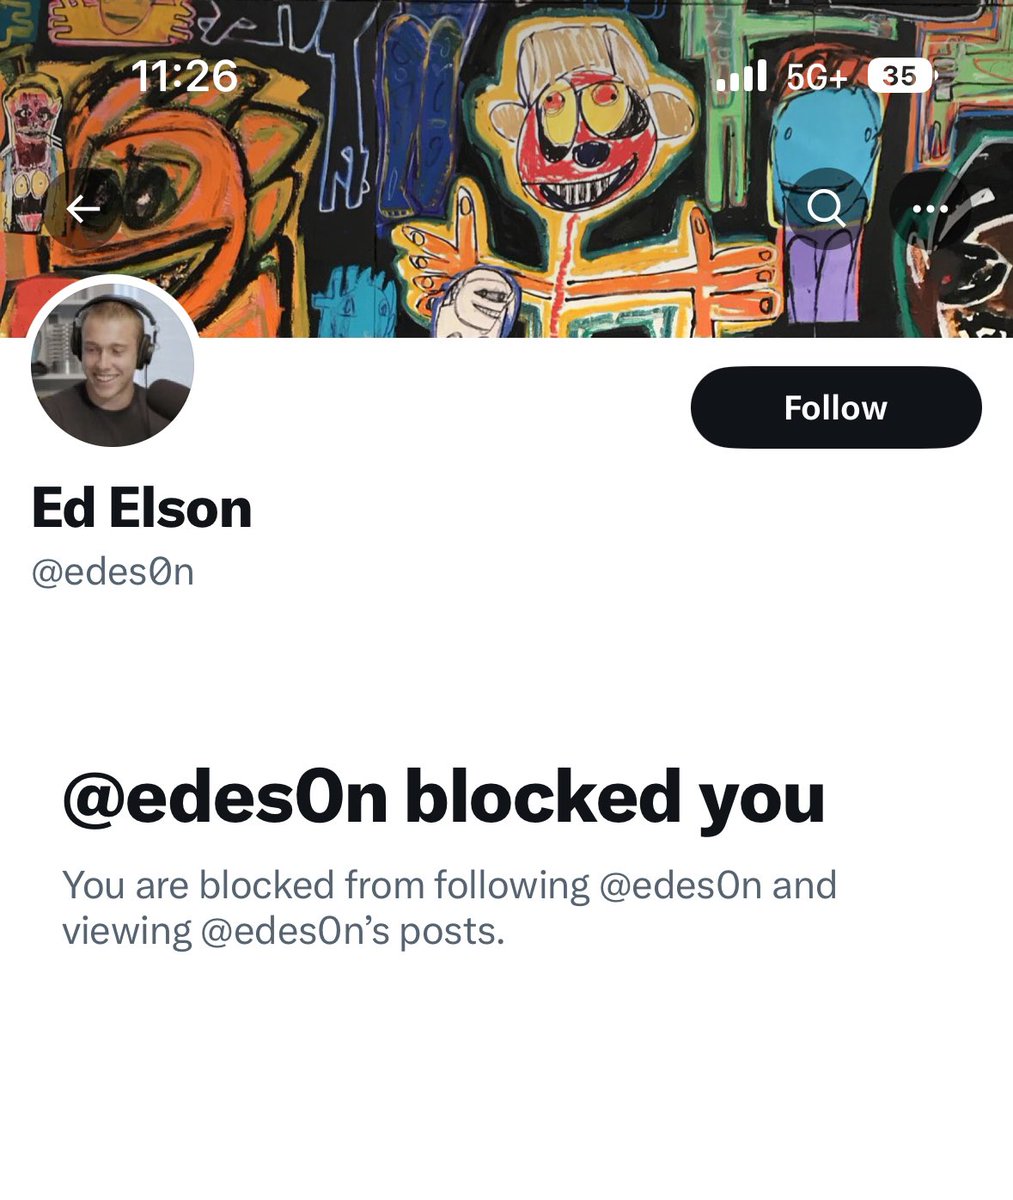 This is not me. Please report @edes0n